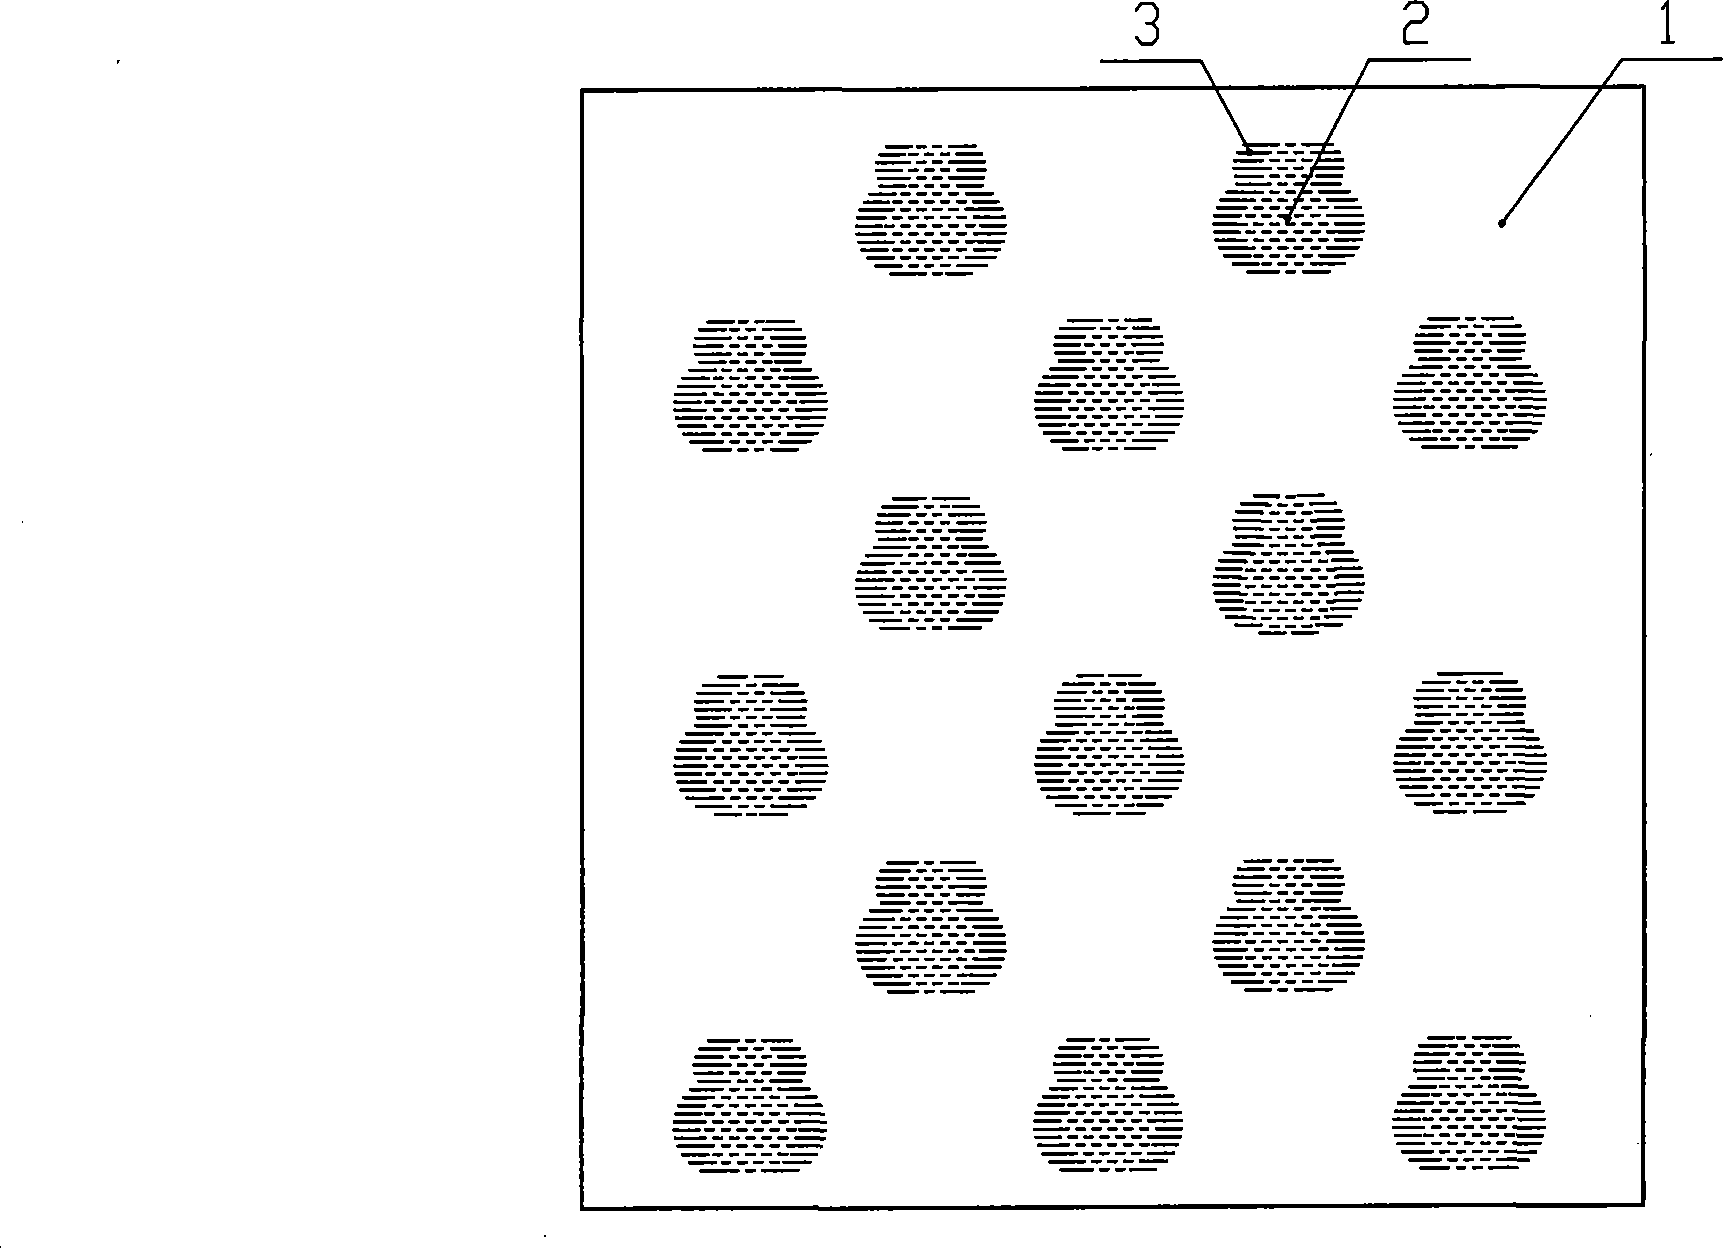 Method of manufacture of cutting motif fabric